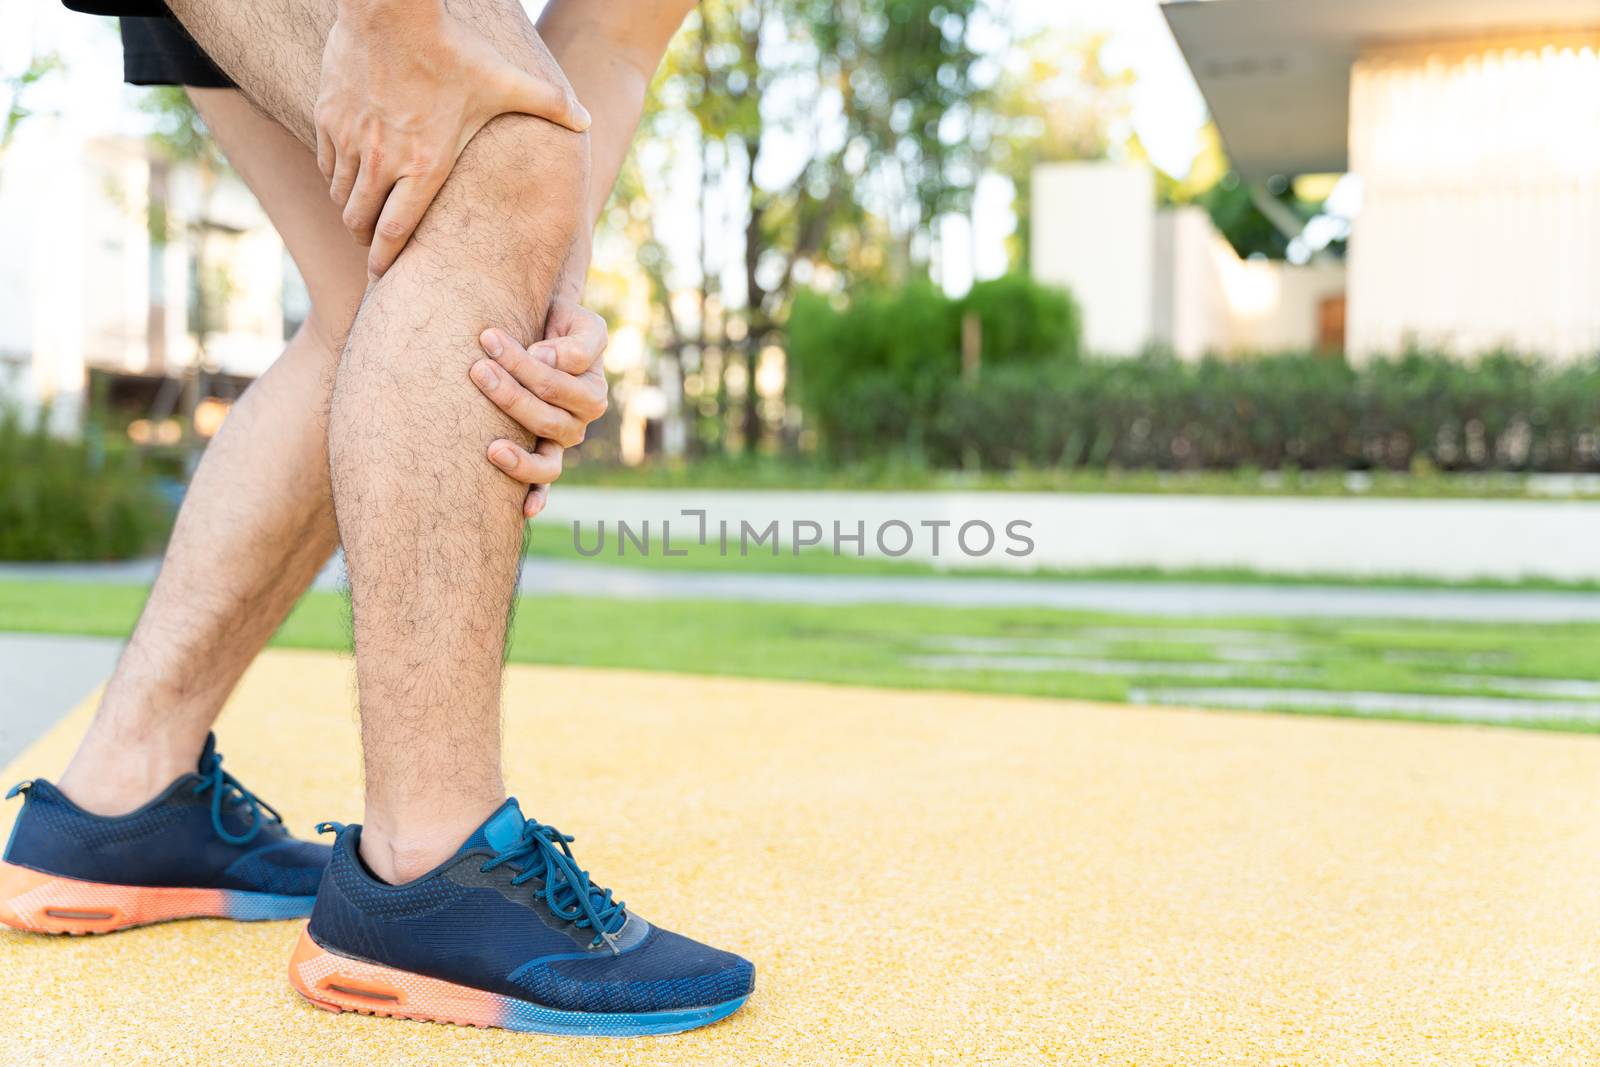 Male runner athlete leg injury and pain. Hands grab painful knee while running in the park.